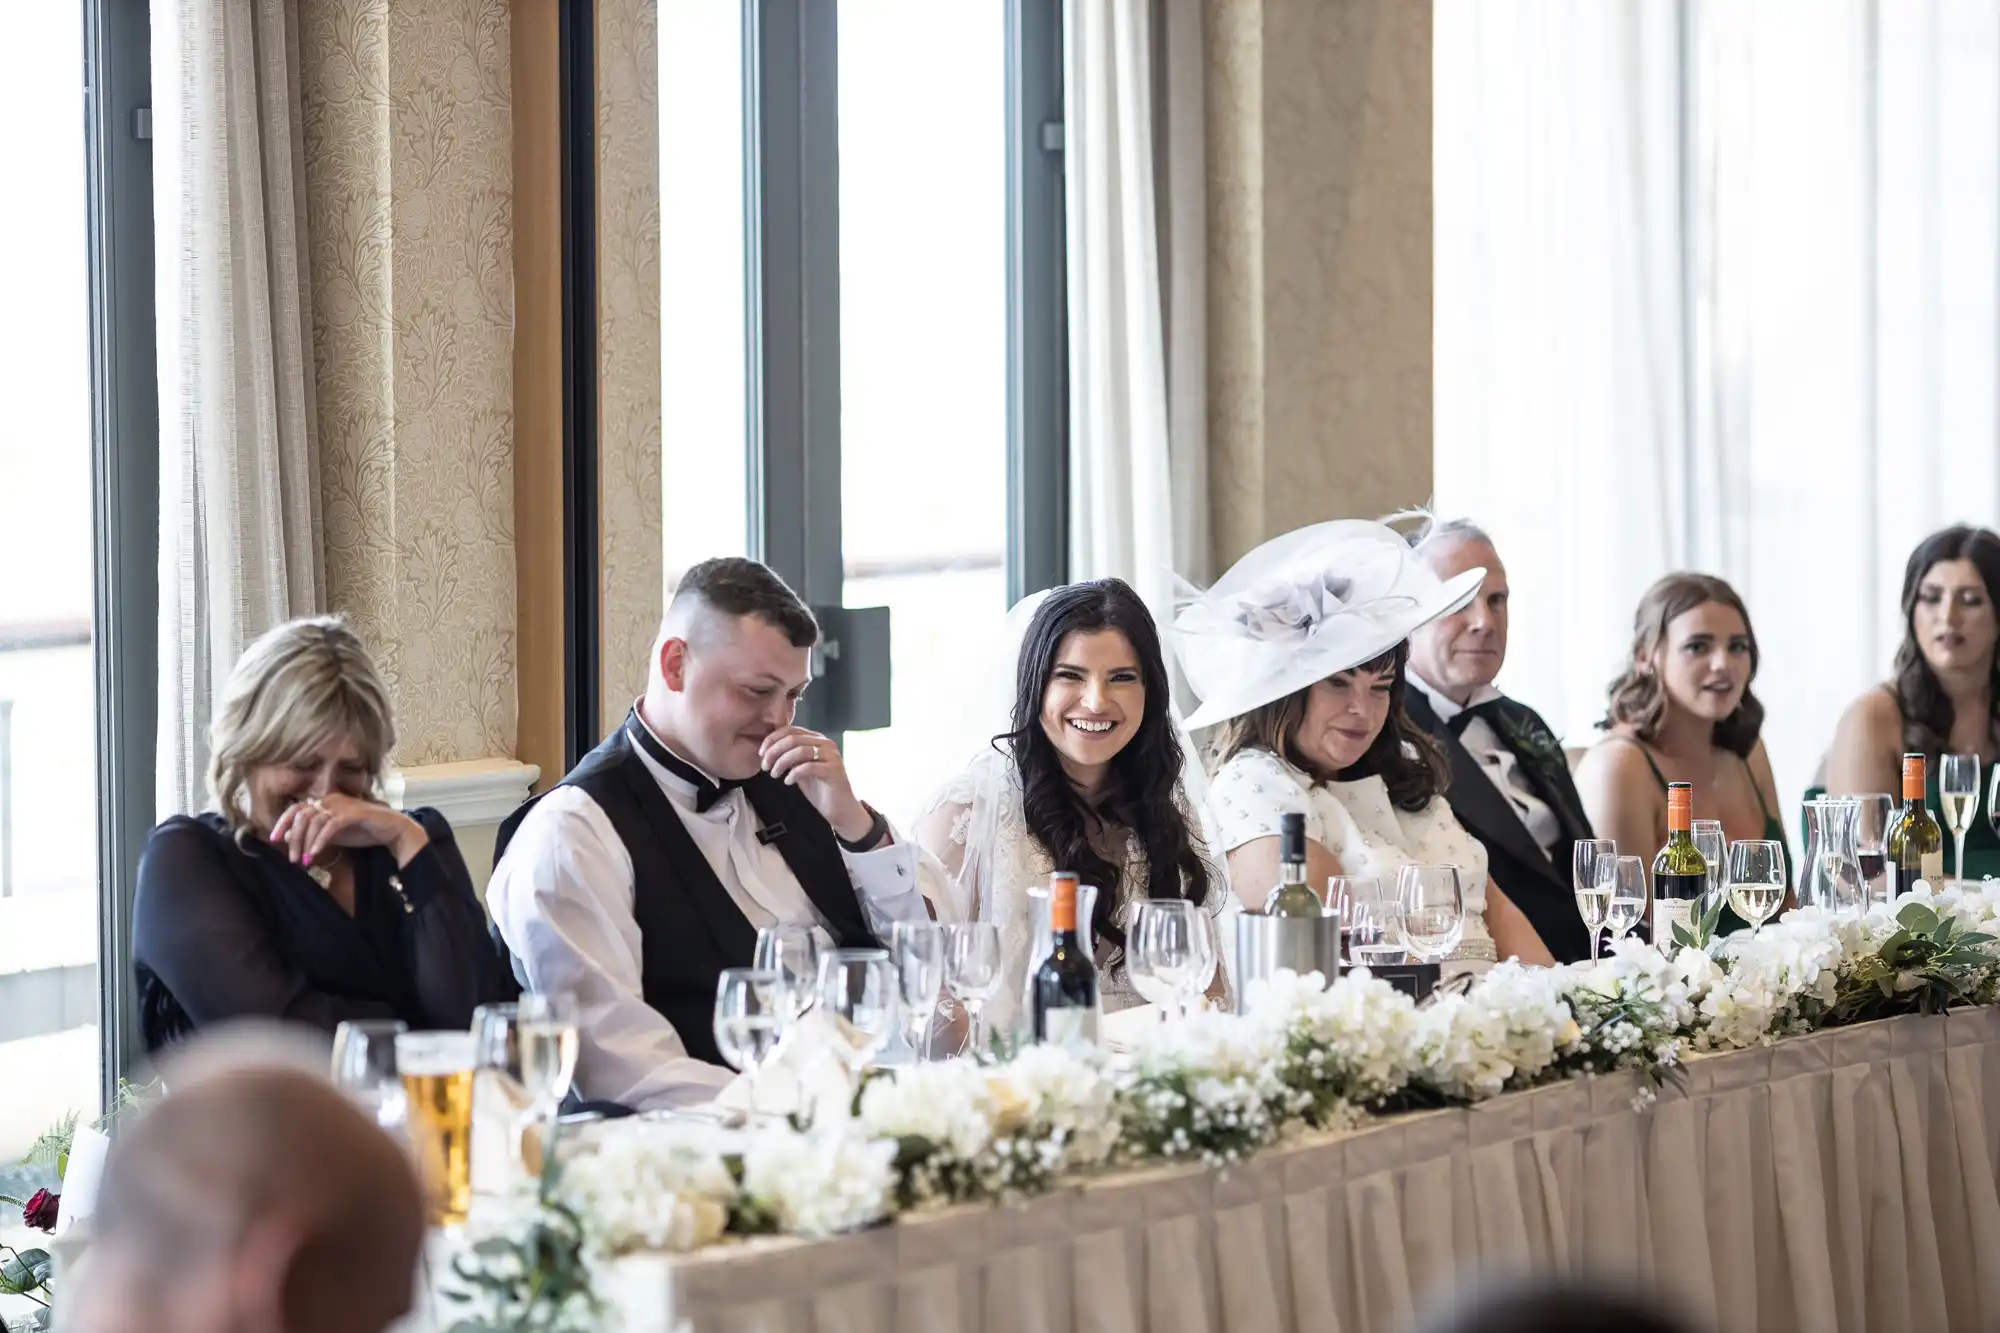 A bride and groom sit at a wedding reception table laughing with guests, surrounded by floral decorations.